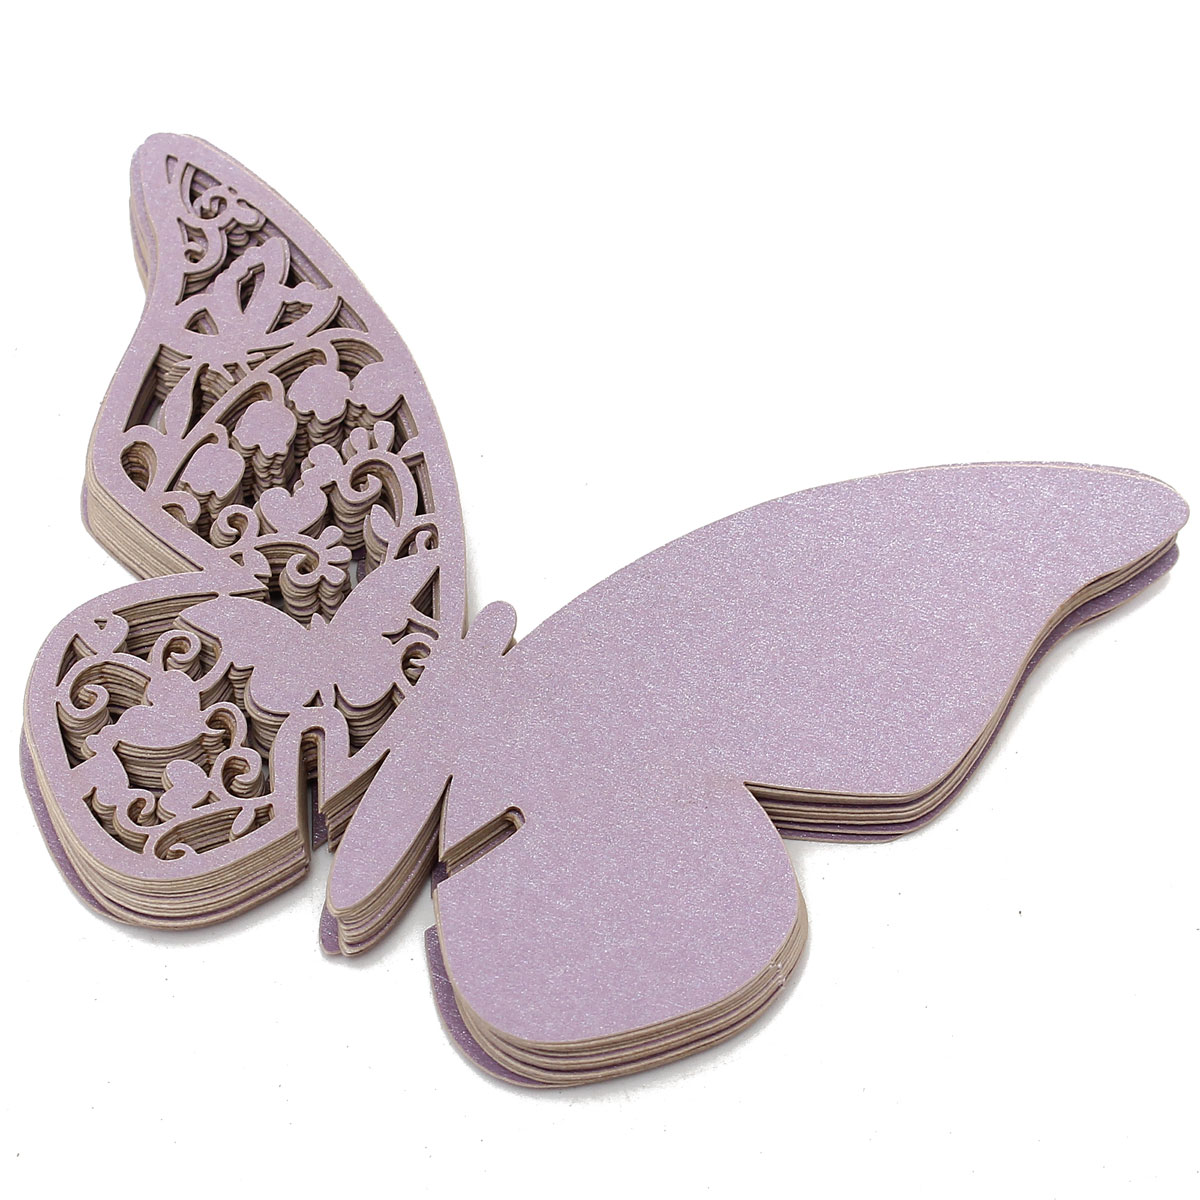 20Pcs-Butterfly-Wedding-Name-Place-Cards-Wine-Glass-Laser-Cut-Pearlescent-Card-Party-Accessories-1036704